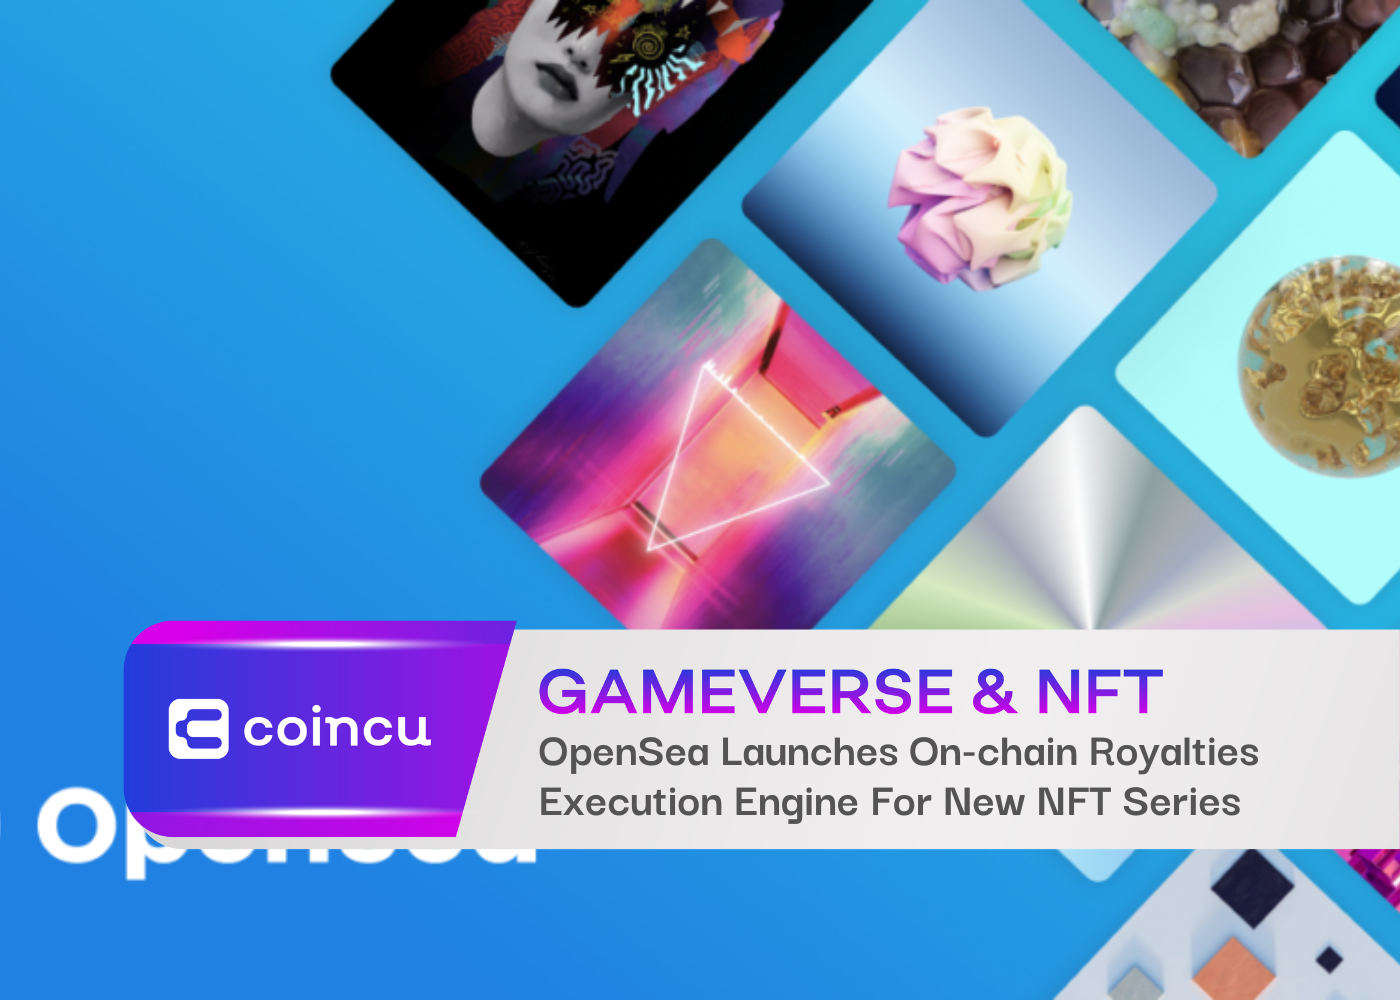 OpenSea Launches On-chain Royalties Execution Engine For New NFT Series